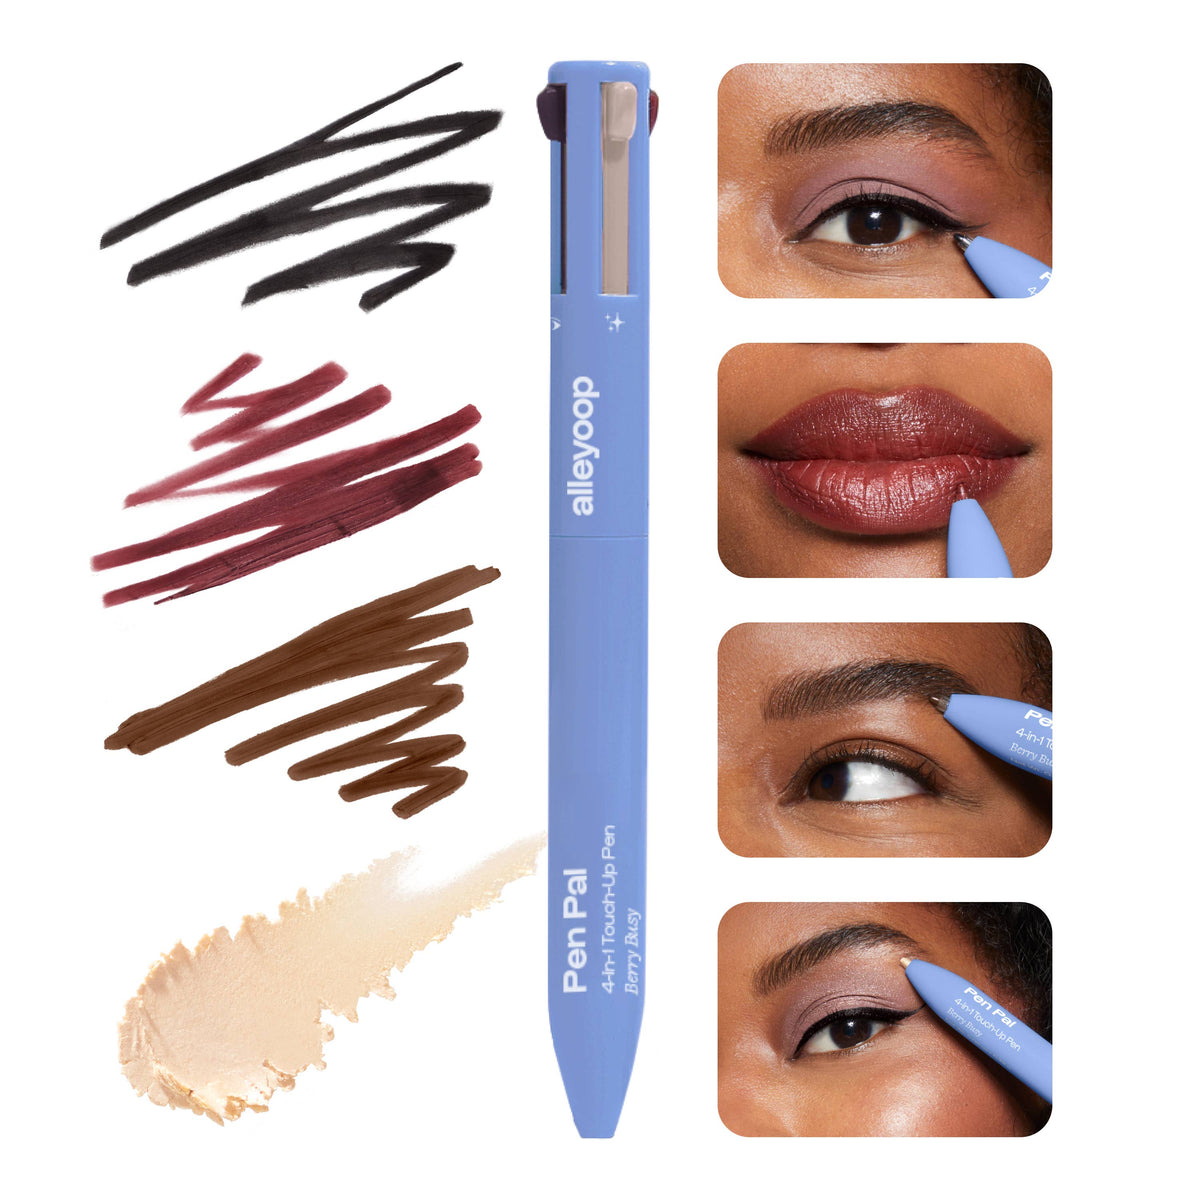 Pen Pal 4-in-1 Makeup Touch Up Pen - Berry Busy: Berry Busy